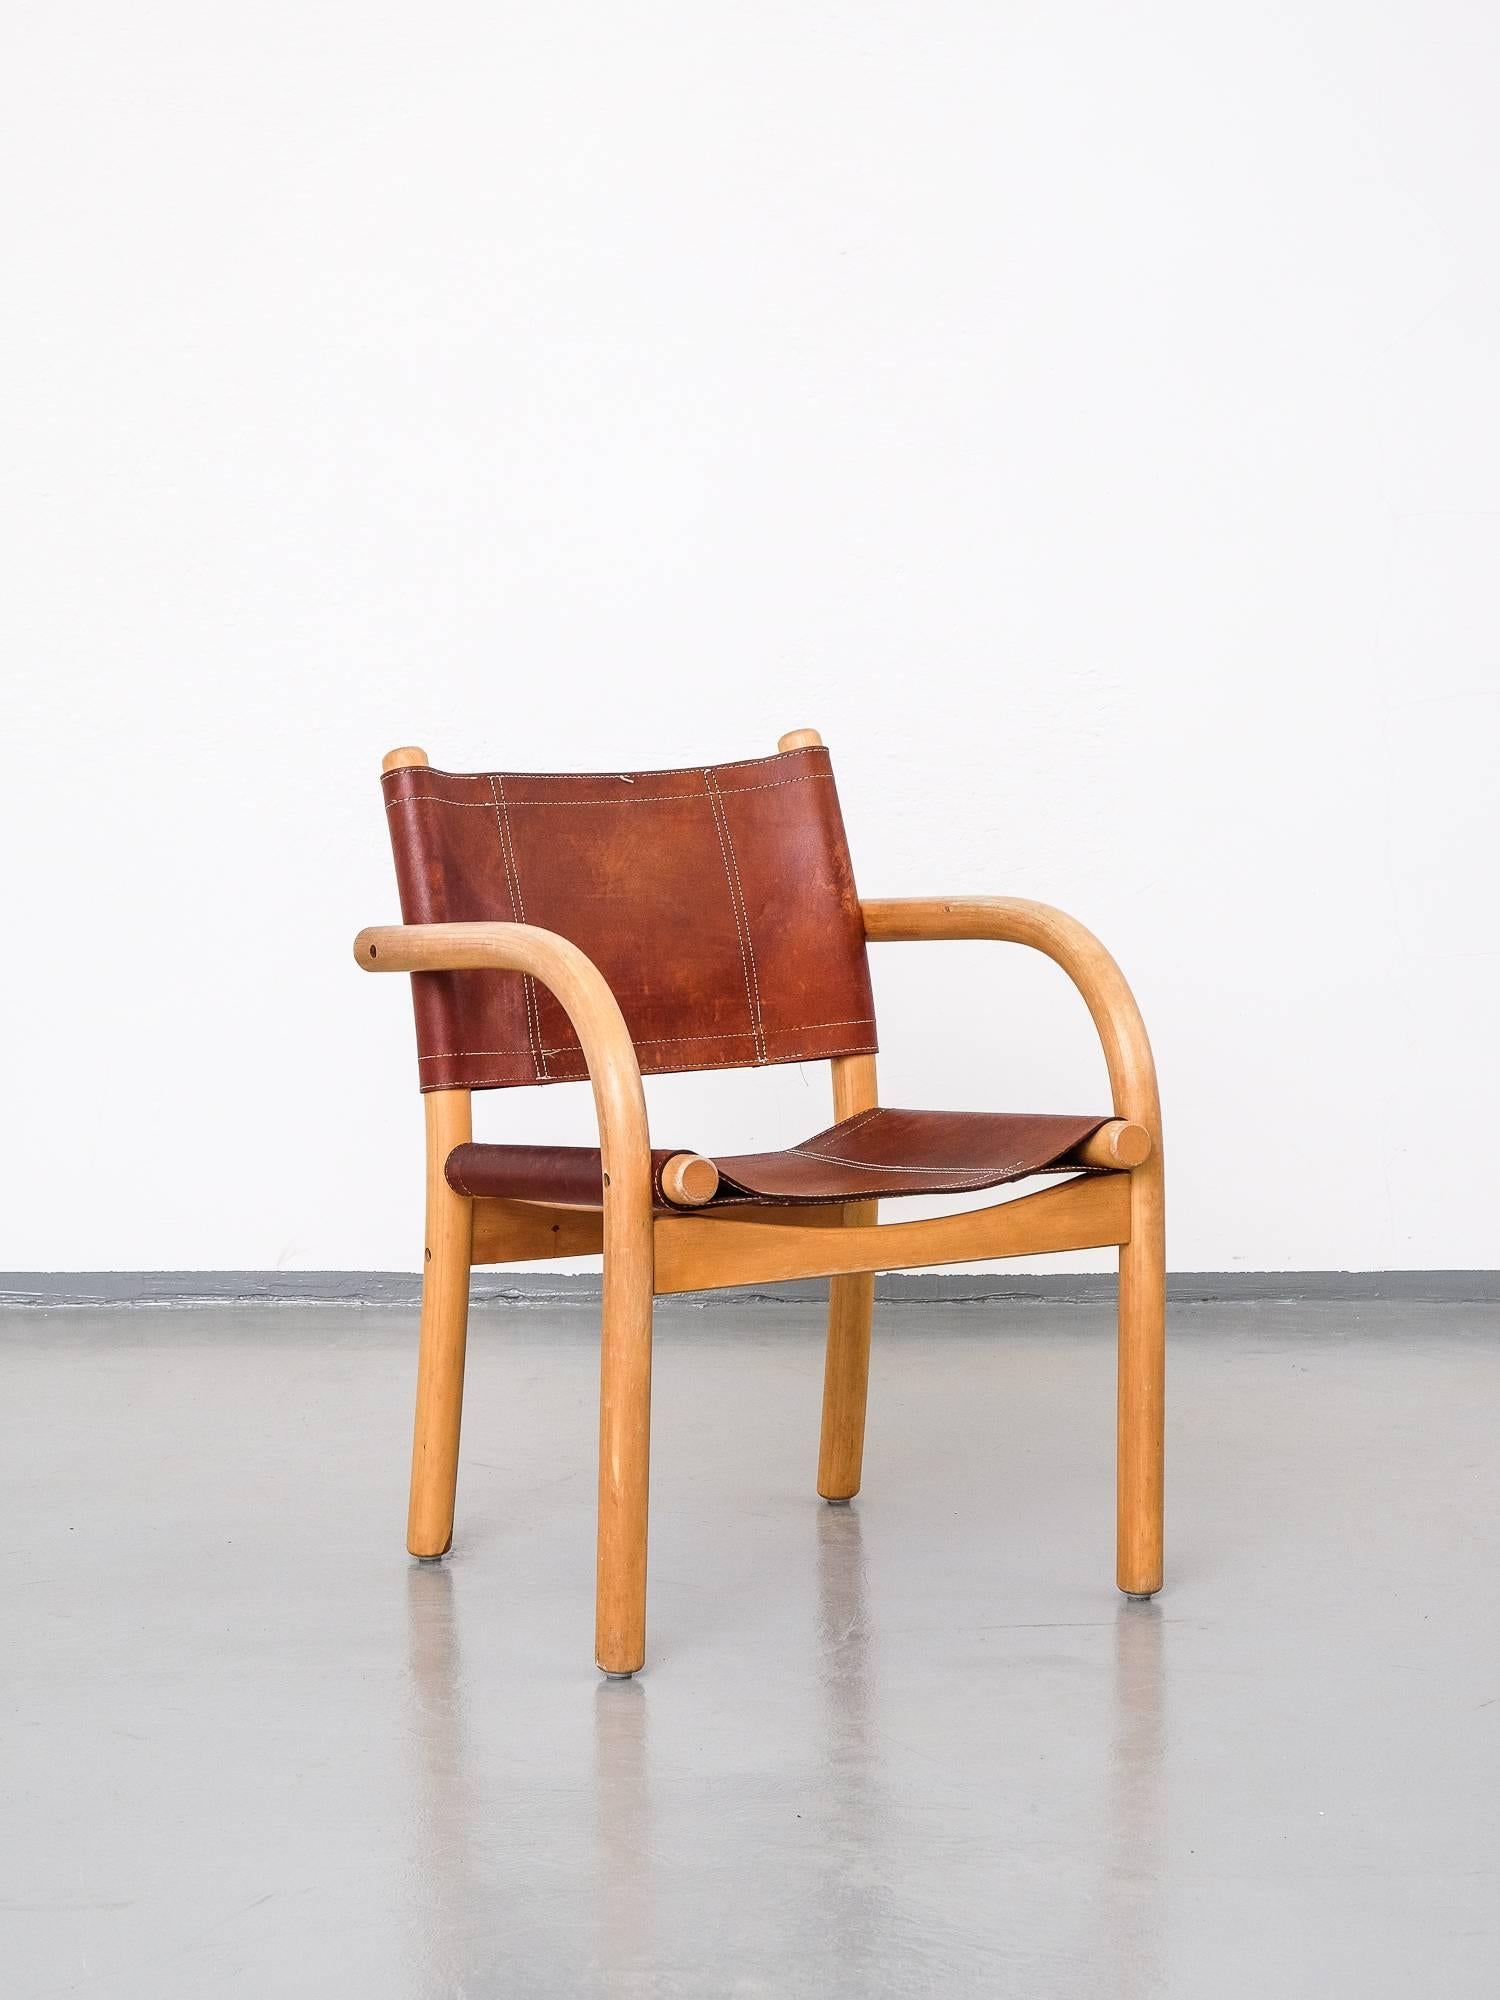 Classic safari chair designed in 1974 by Ben af Schultén for Artek. Birch frame with seat and back in natural leather. Heavy patina on leather and worn armrests. Measures: Seat height 43 cm.